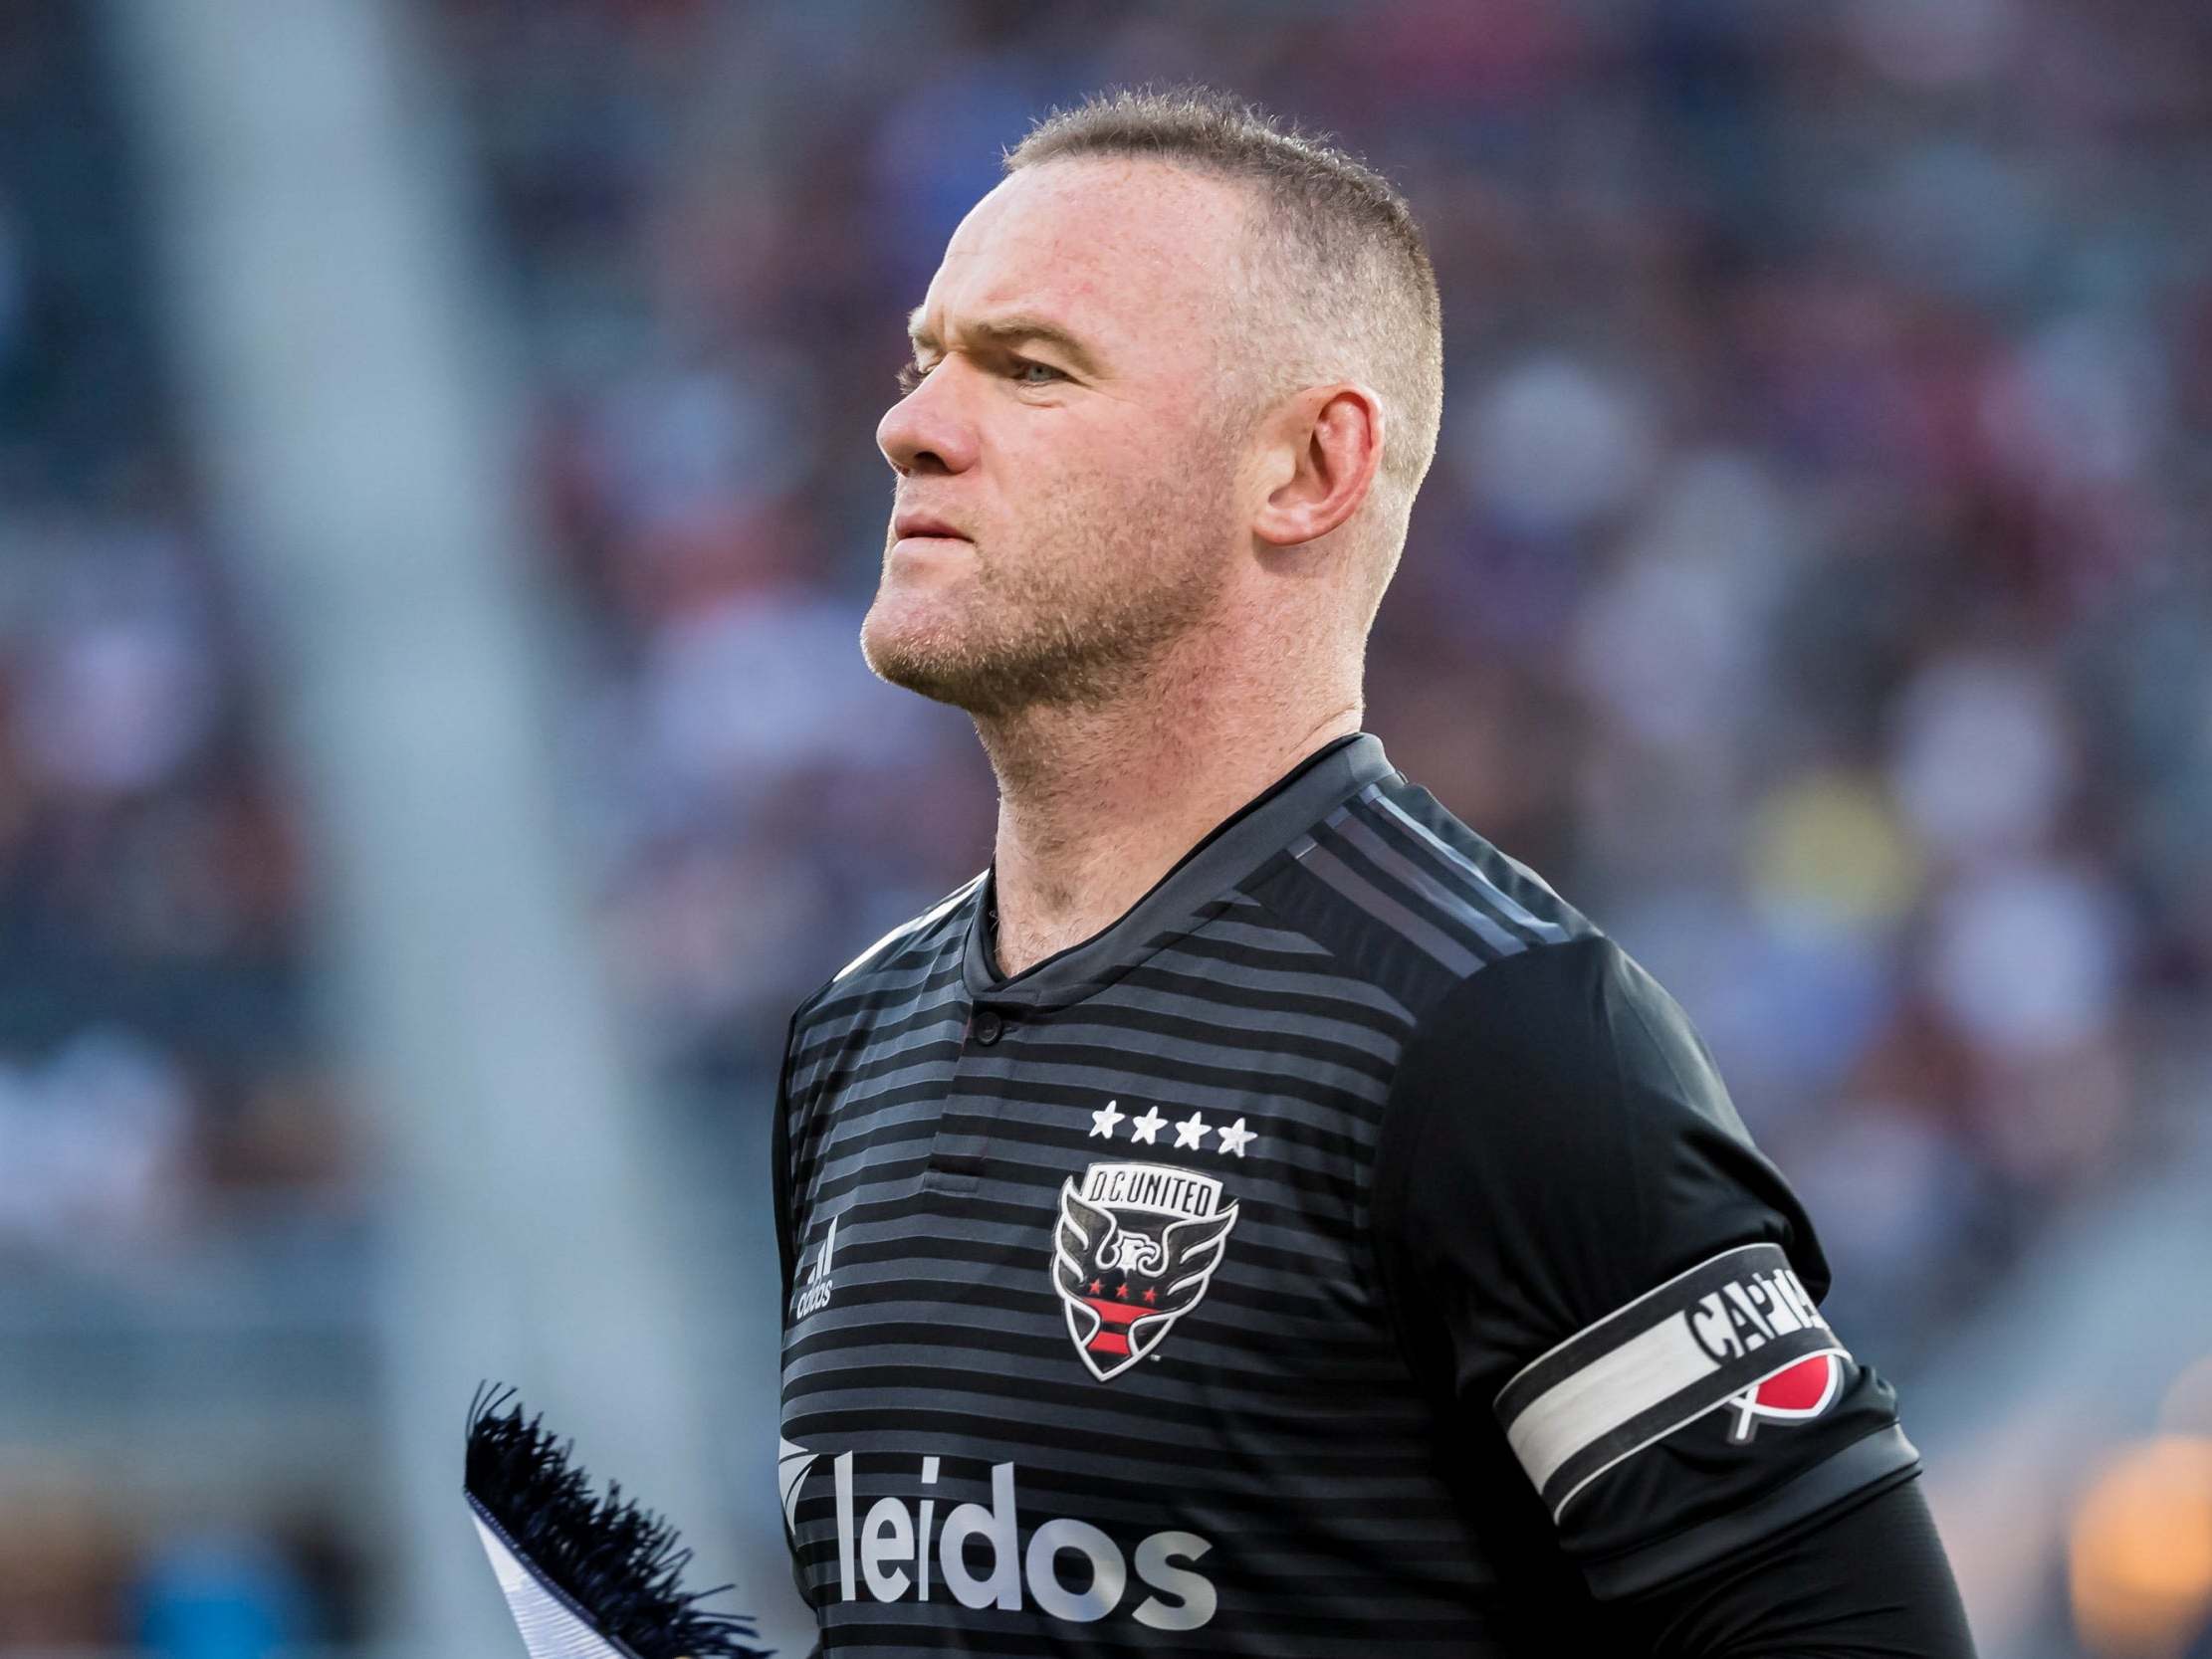 Wayne Rooney has thrived in the MLS during a short-lived spell